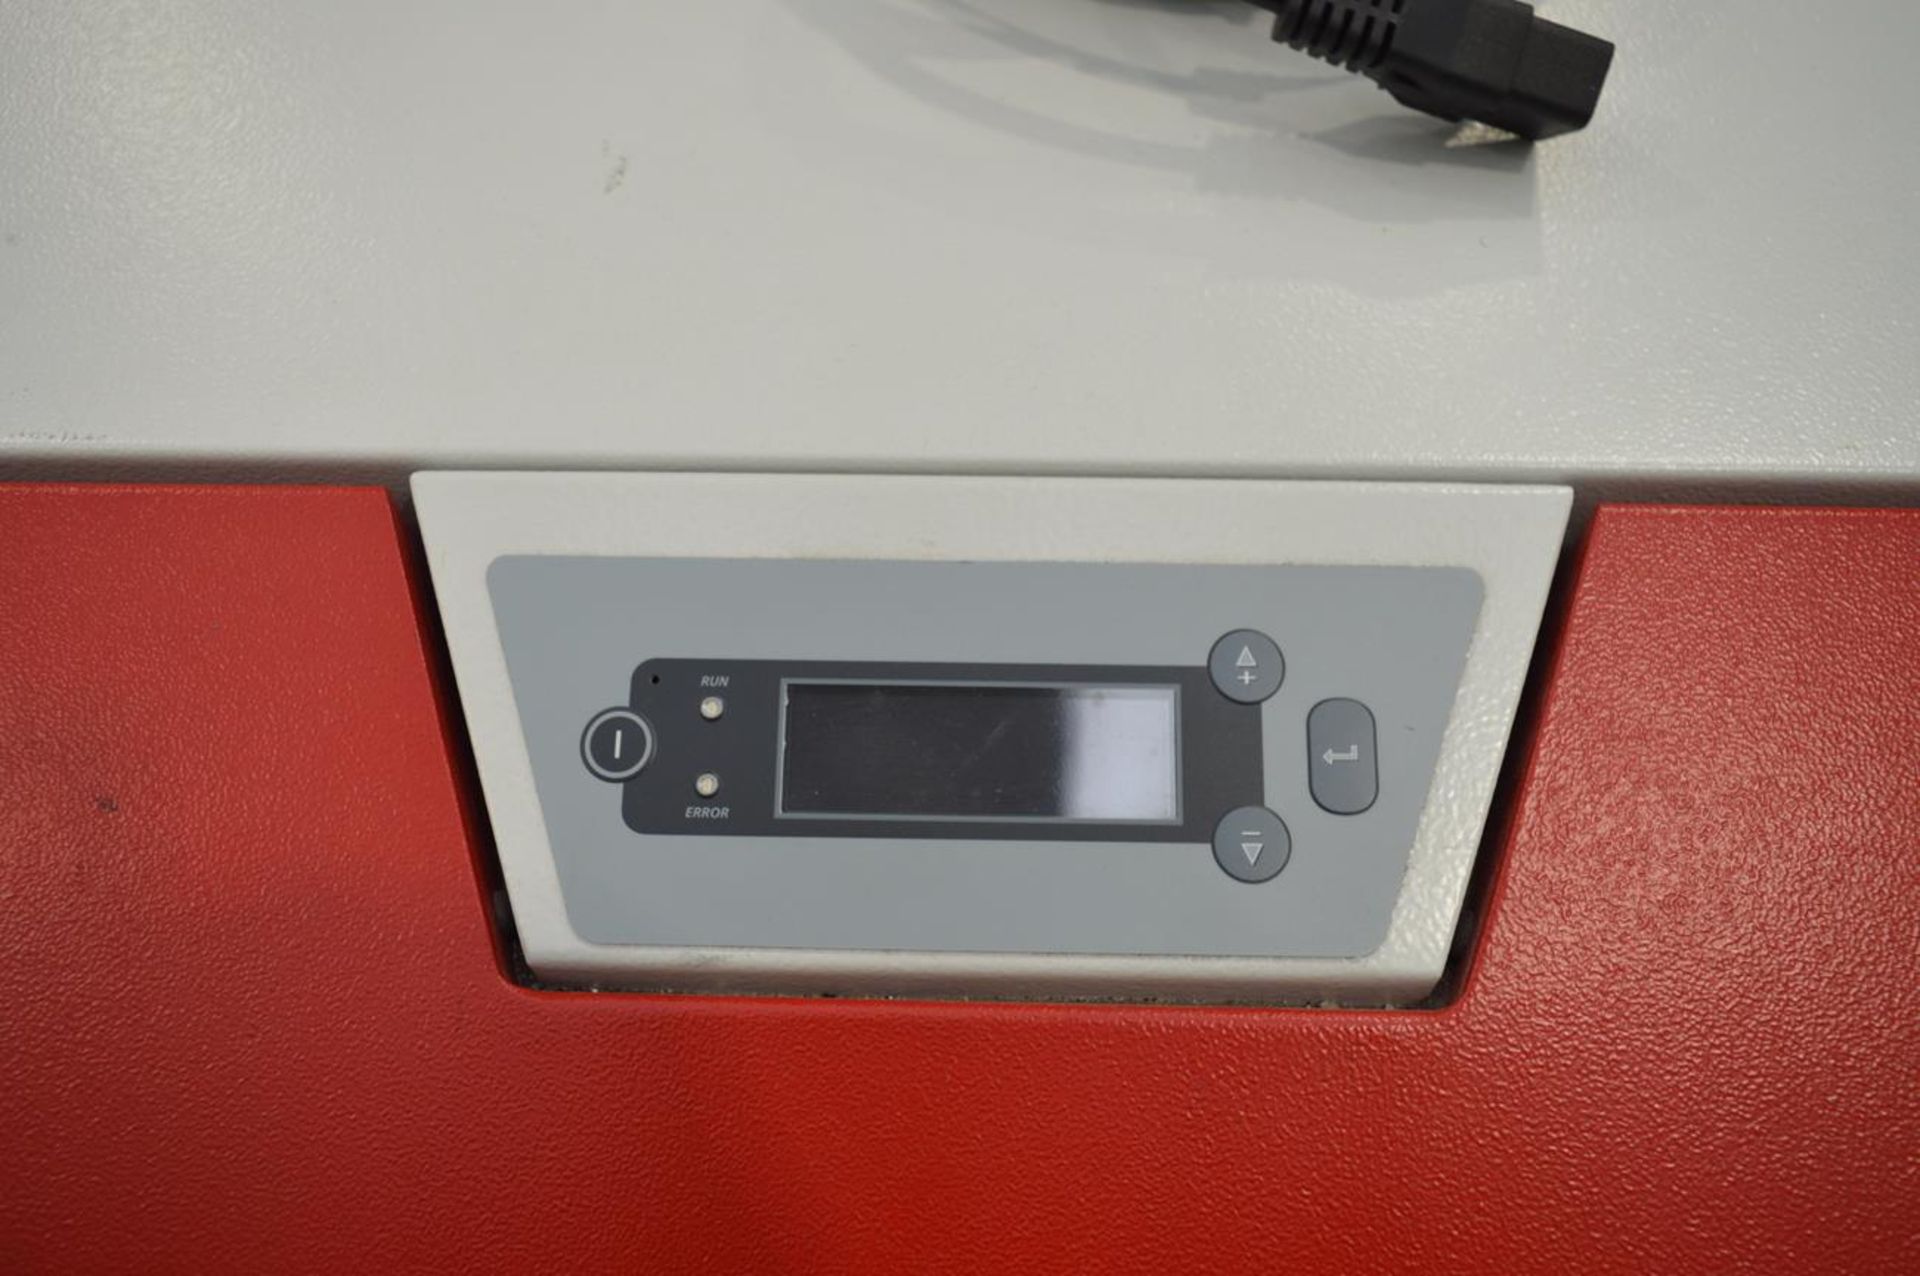 Trotec, Speedy 360 CO2 laser cutter and engraver , Serial No. S36-1408 with controller - Image 7 of 9